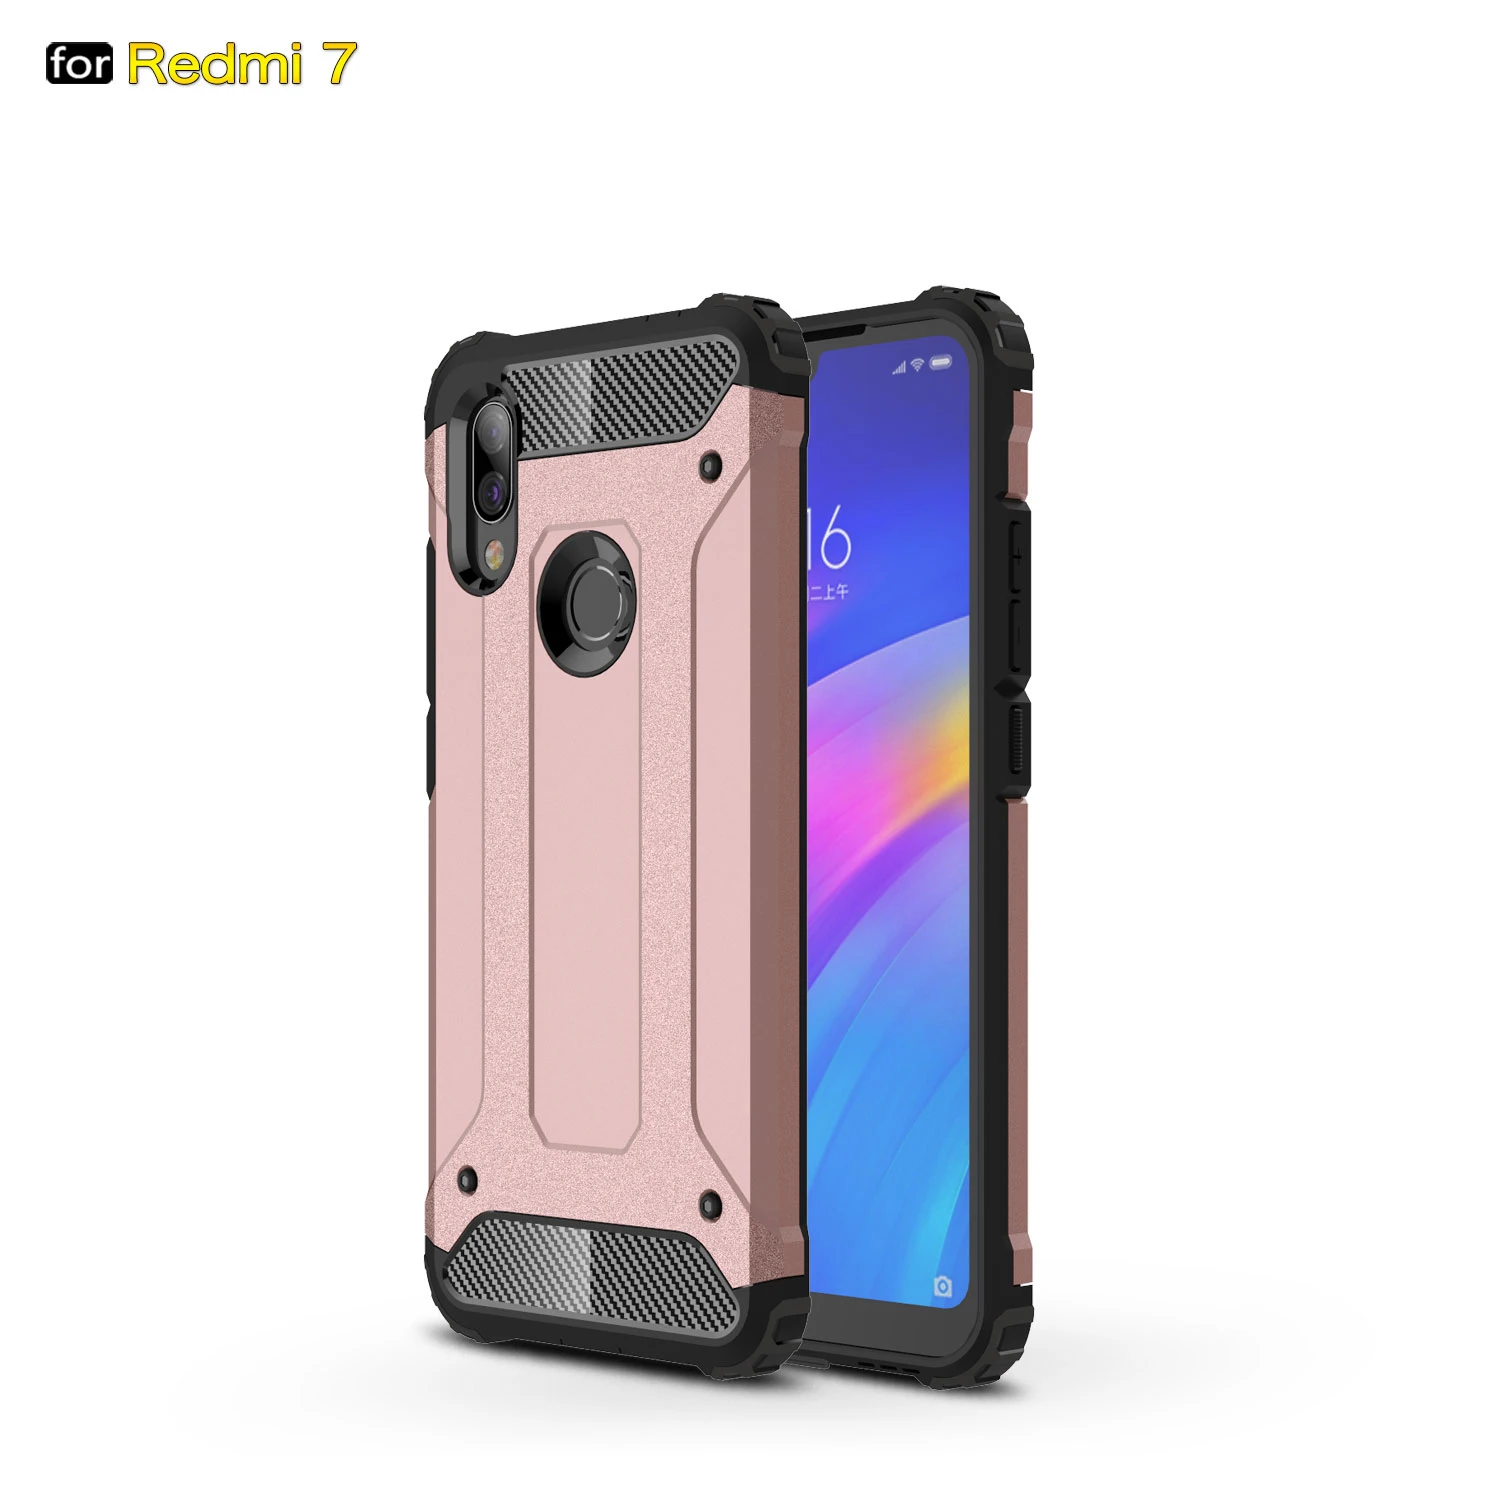 

DOYERS case forcover for Redmi 7,Original Hight Quality Ultrathin Soft TPU Hybrid Armor Case for Redmi 7, N/a